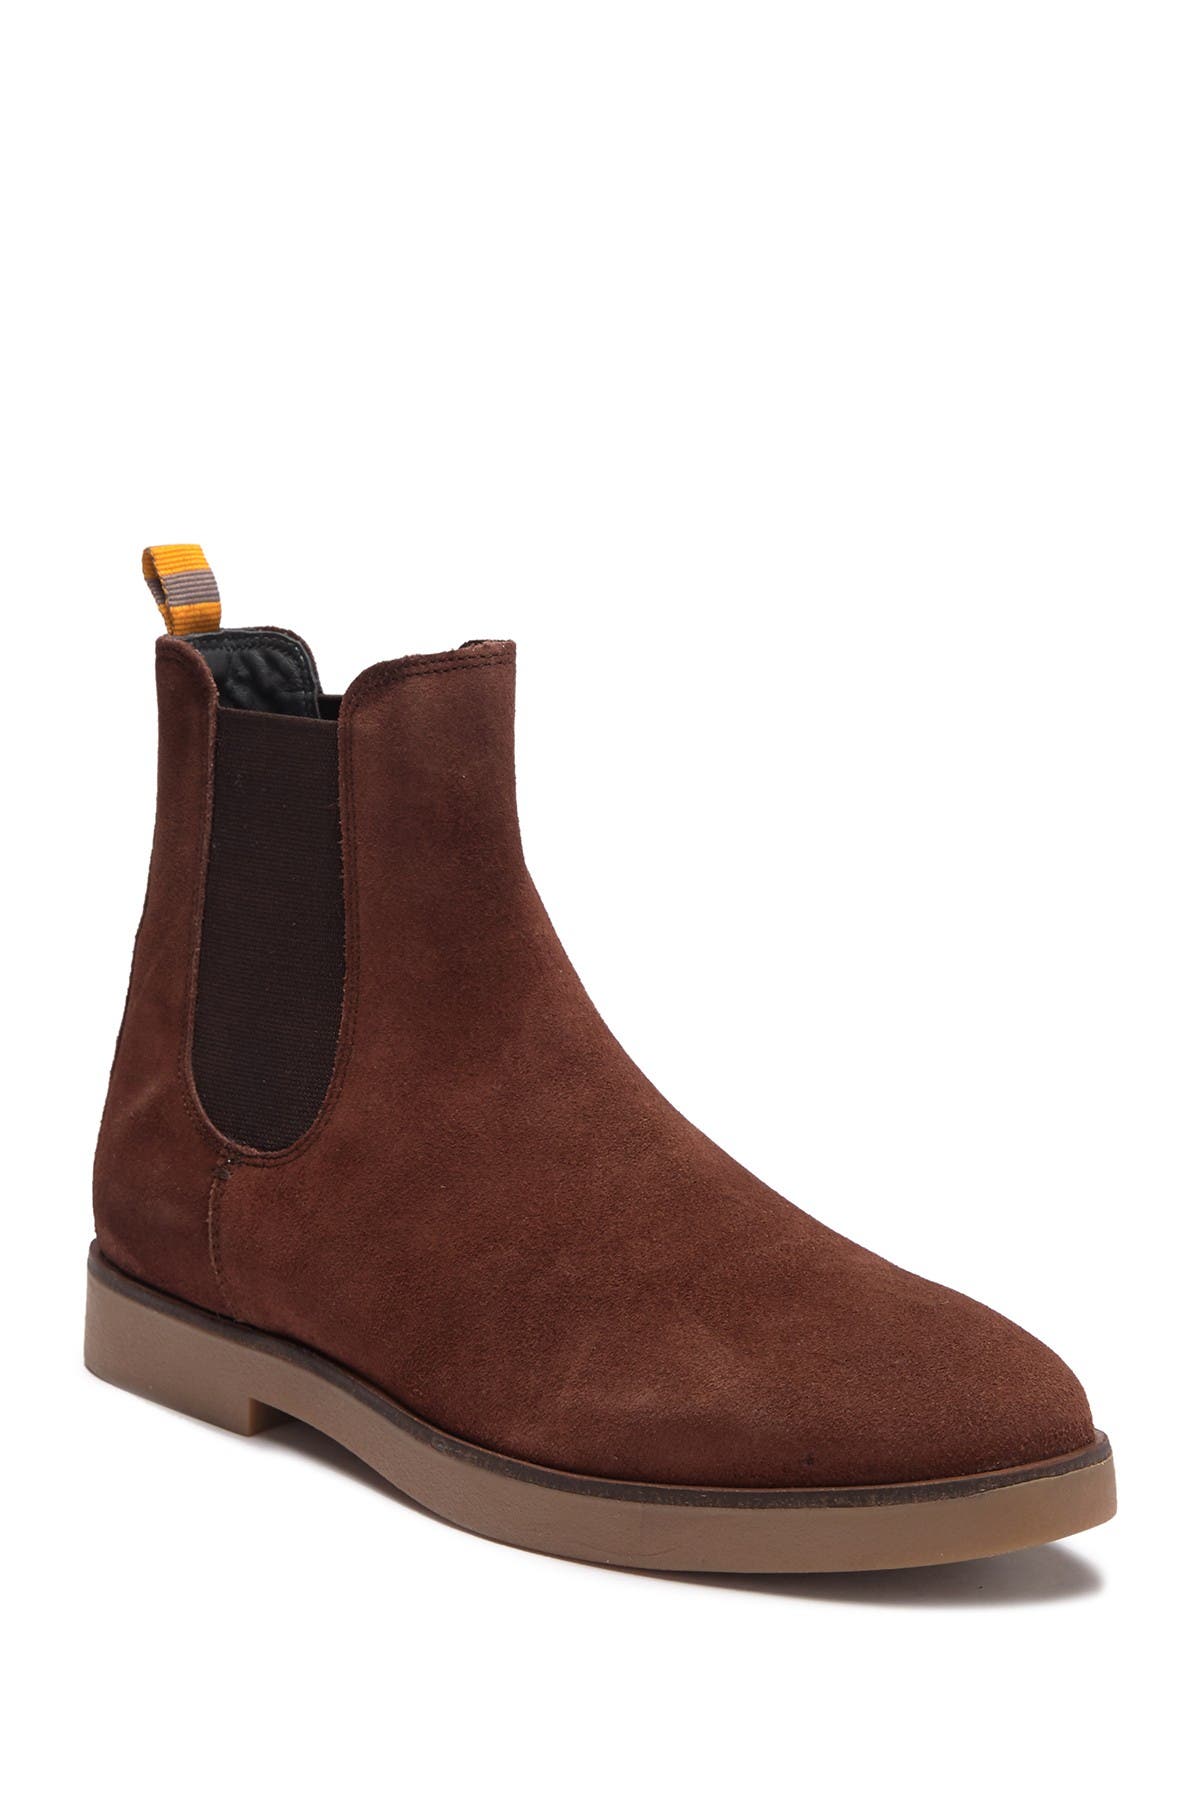 Frank Wright | Dutch Suede Chelsea Boot 